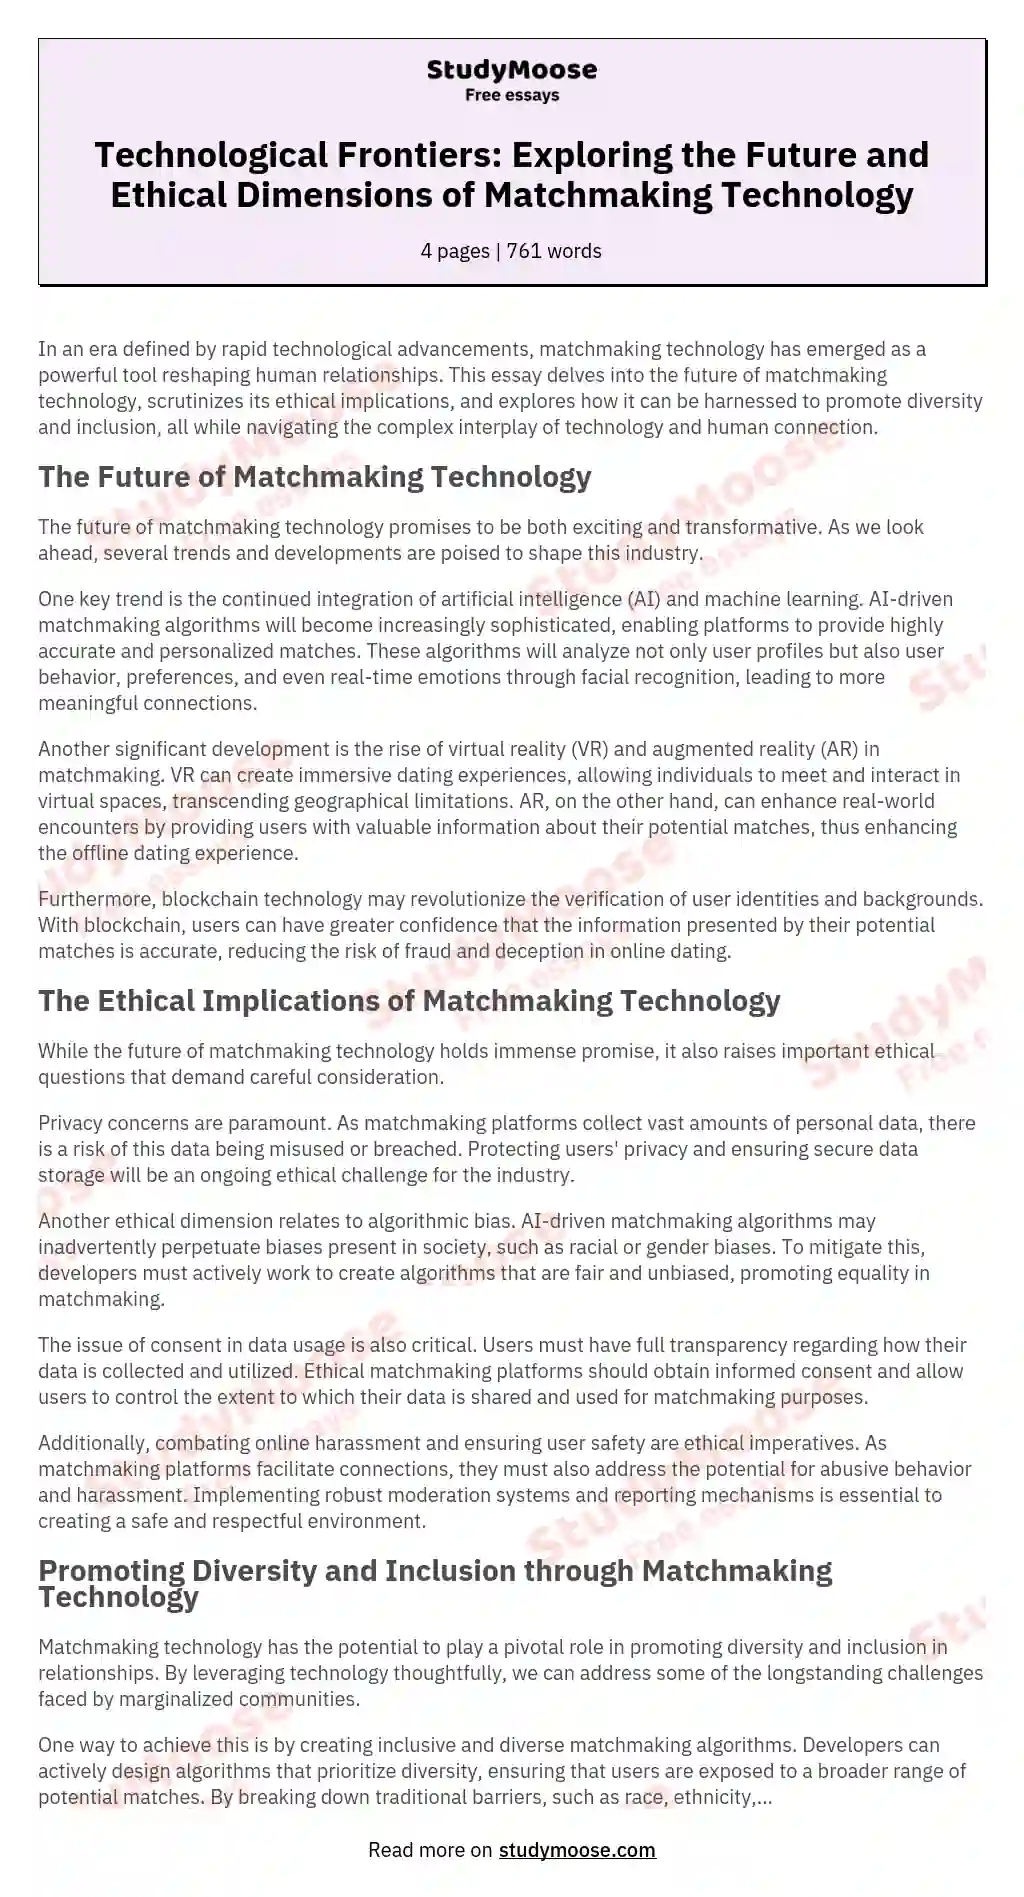 Technological Frontiers: Exploring the Future and Ethical Dimensions of Matchmaking Technology essay